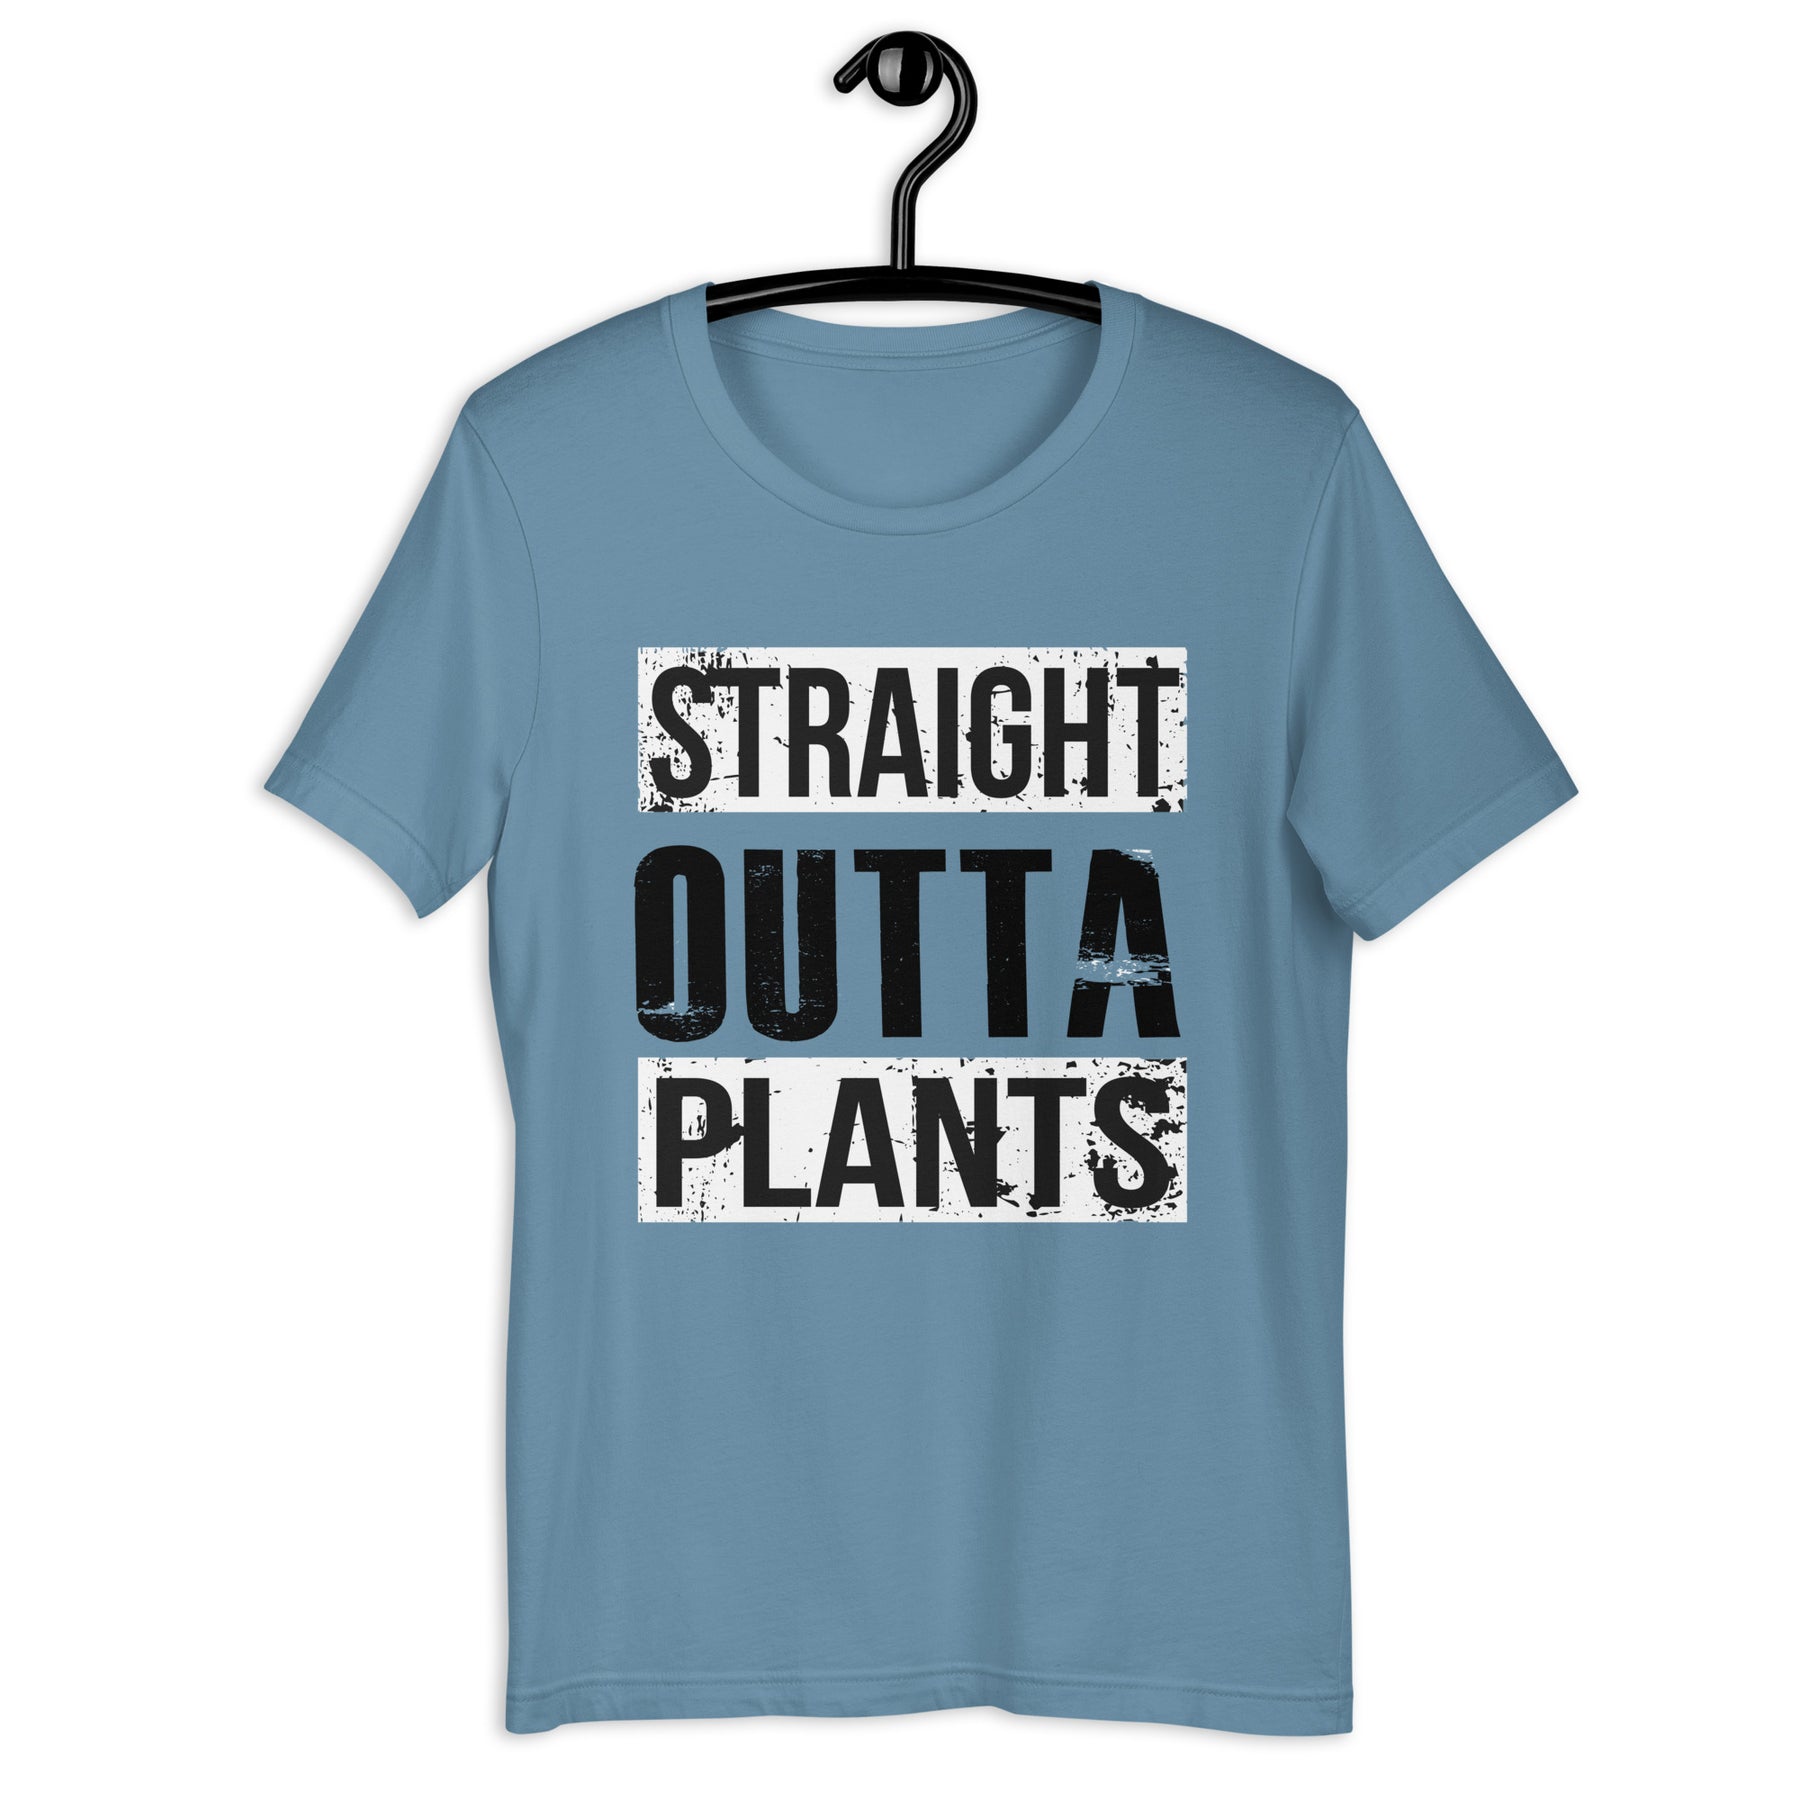 STRAIGHT OUTTA PLANTS Colored t-shirt